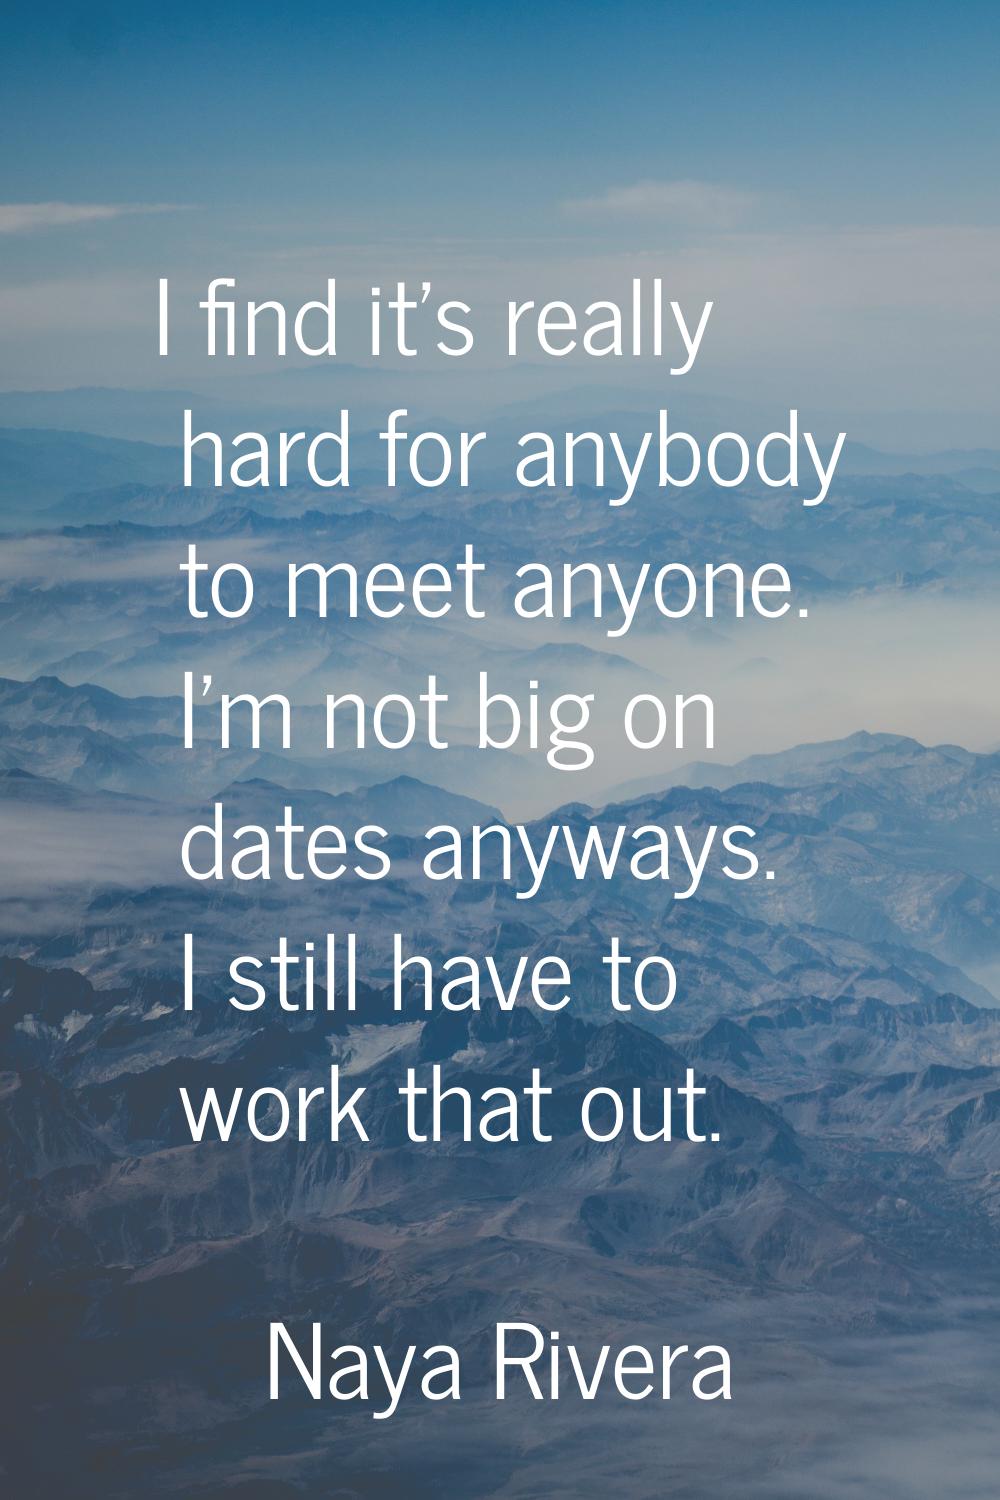 I find it's really hard for anybody to meet anyone. I'm not big on dates anyways. I still have to w